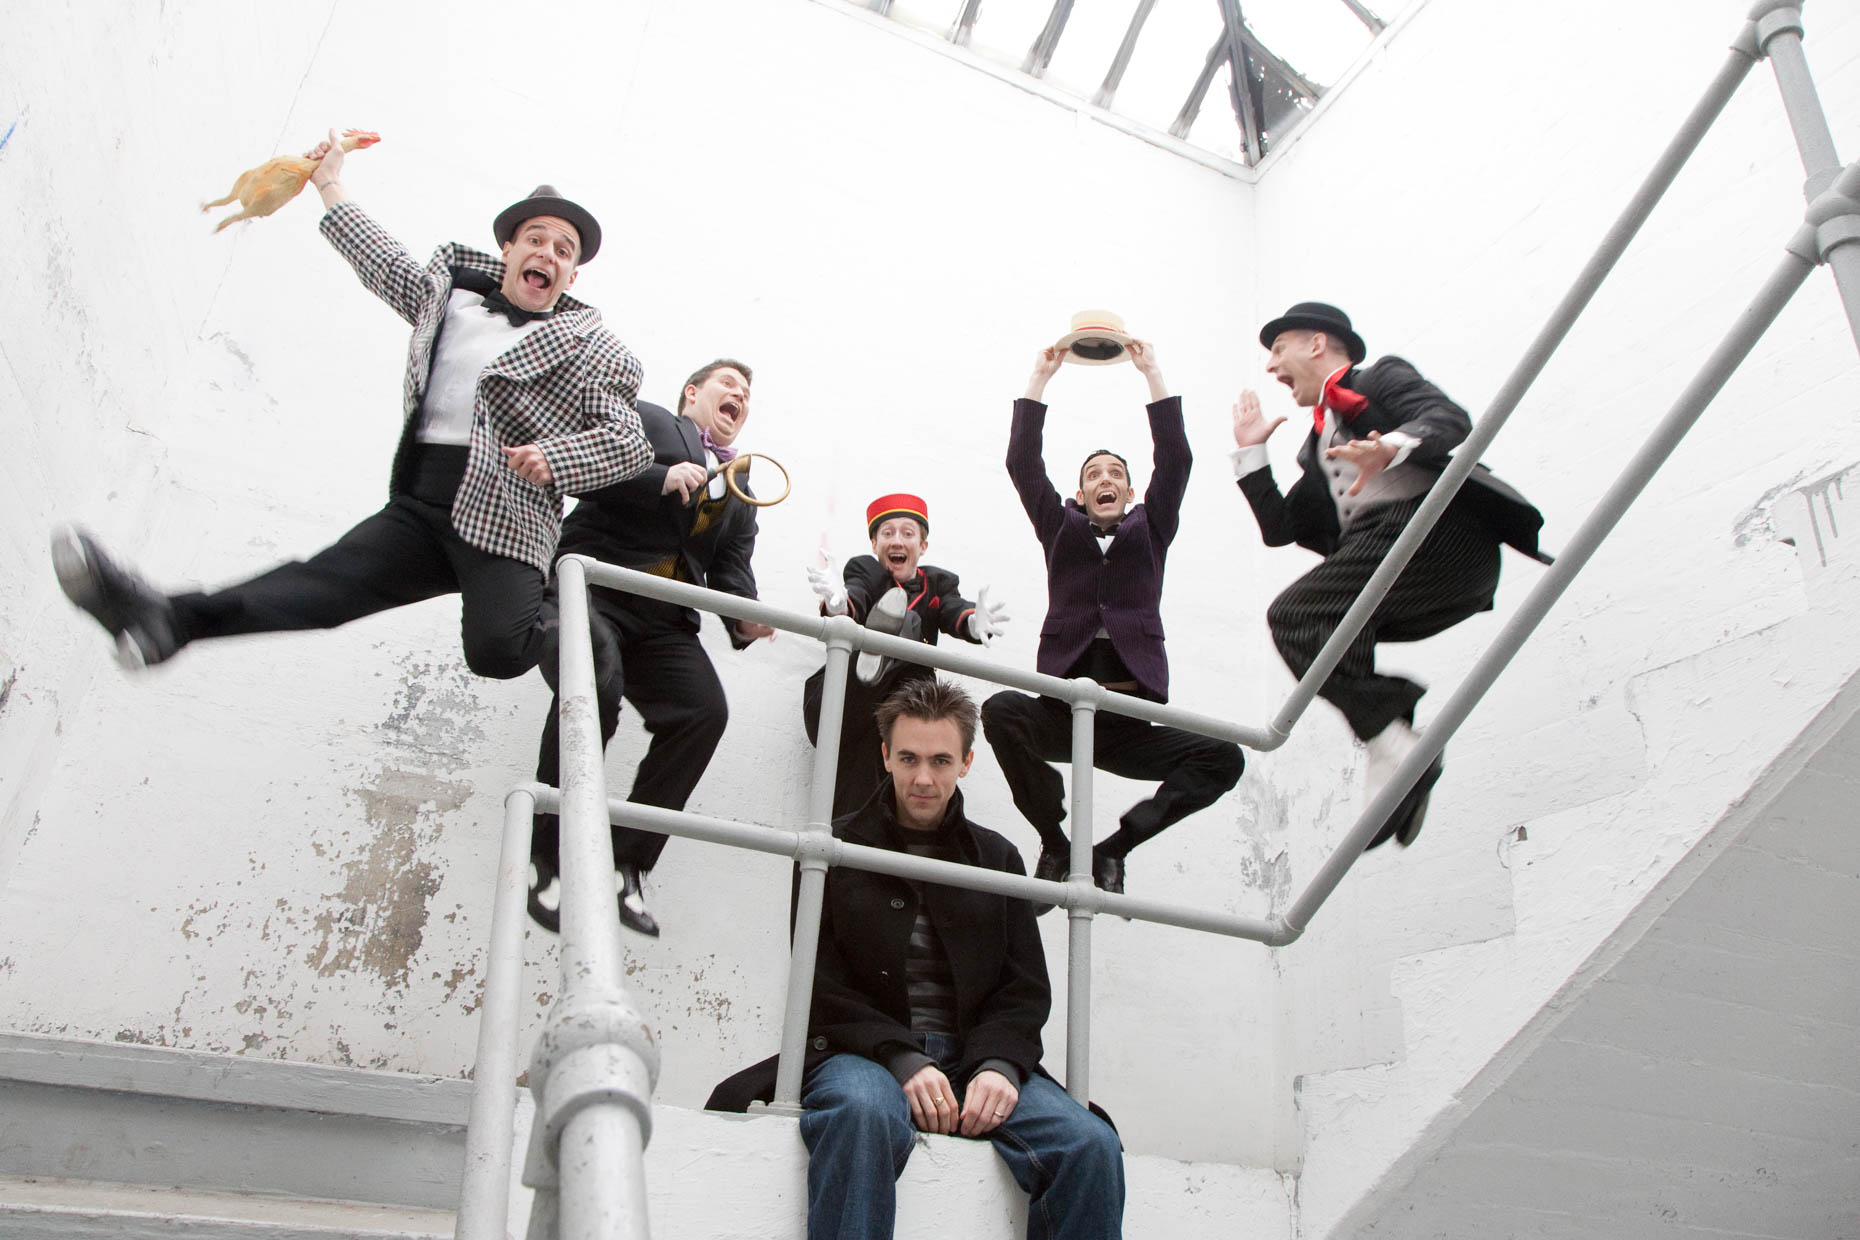 New York vaudeville act flying through the air in a stairwell